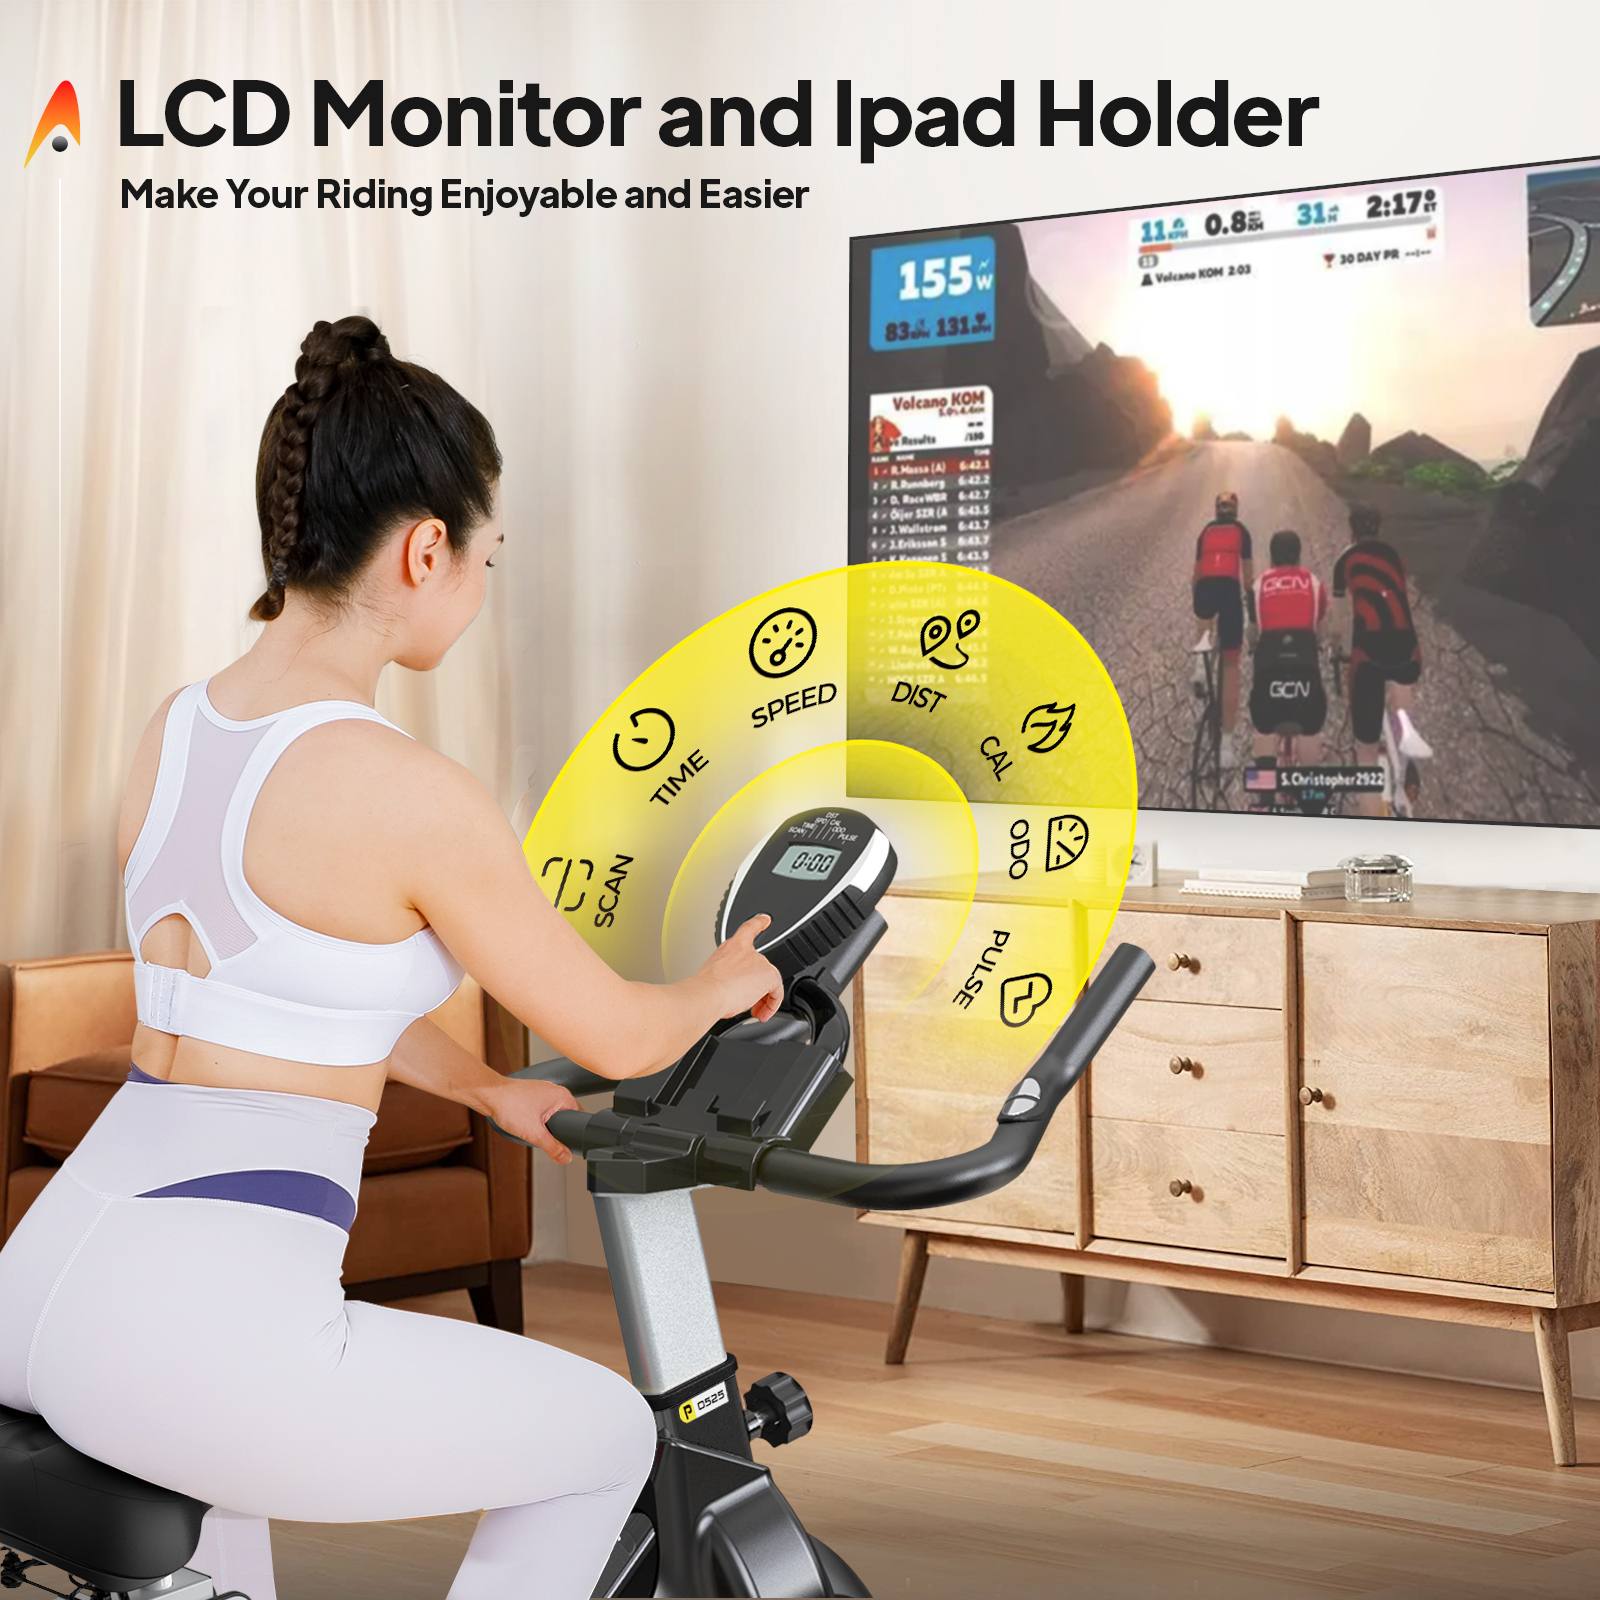 Pooboo Stationary Exercise bike Magnetic Resistance Cycling Bicycle with LCD Monitor for Indoor Cardio Workout 35 Lbs Flywheel Max Weight 330 Lbs - image 4 of 11